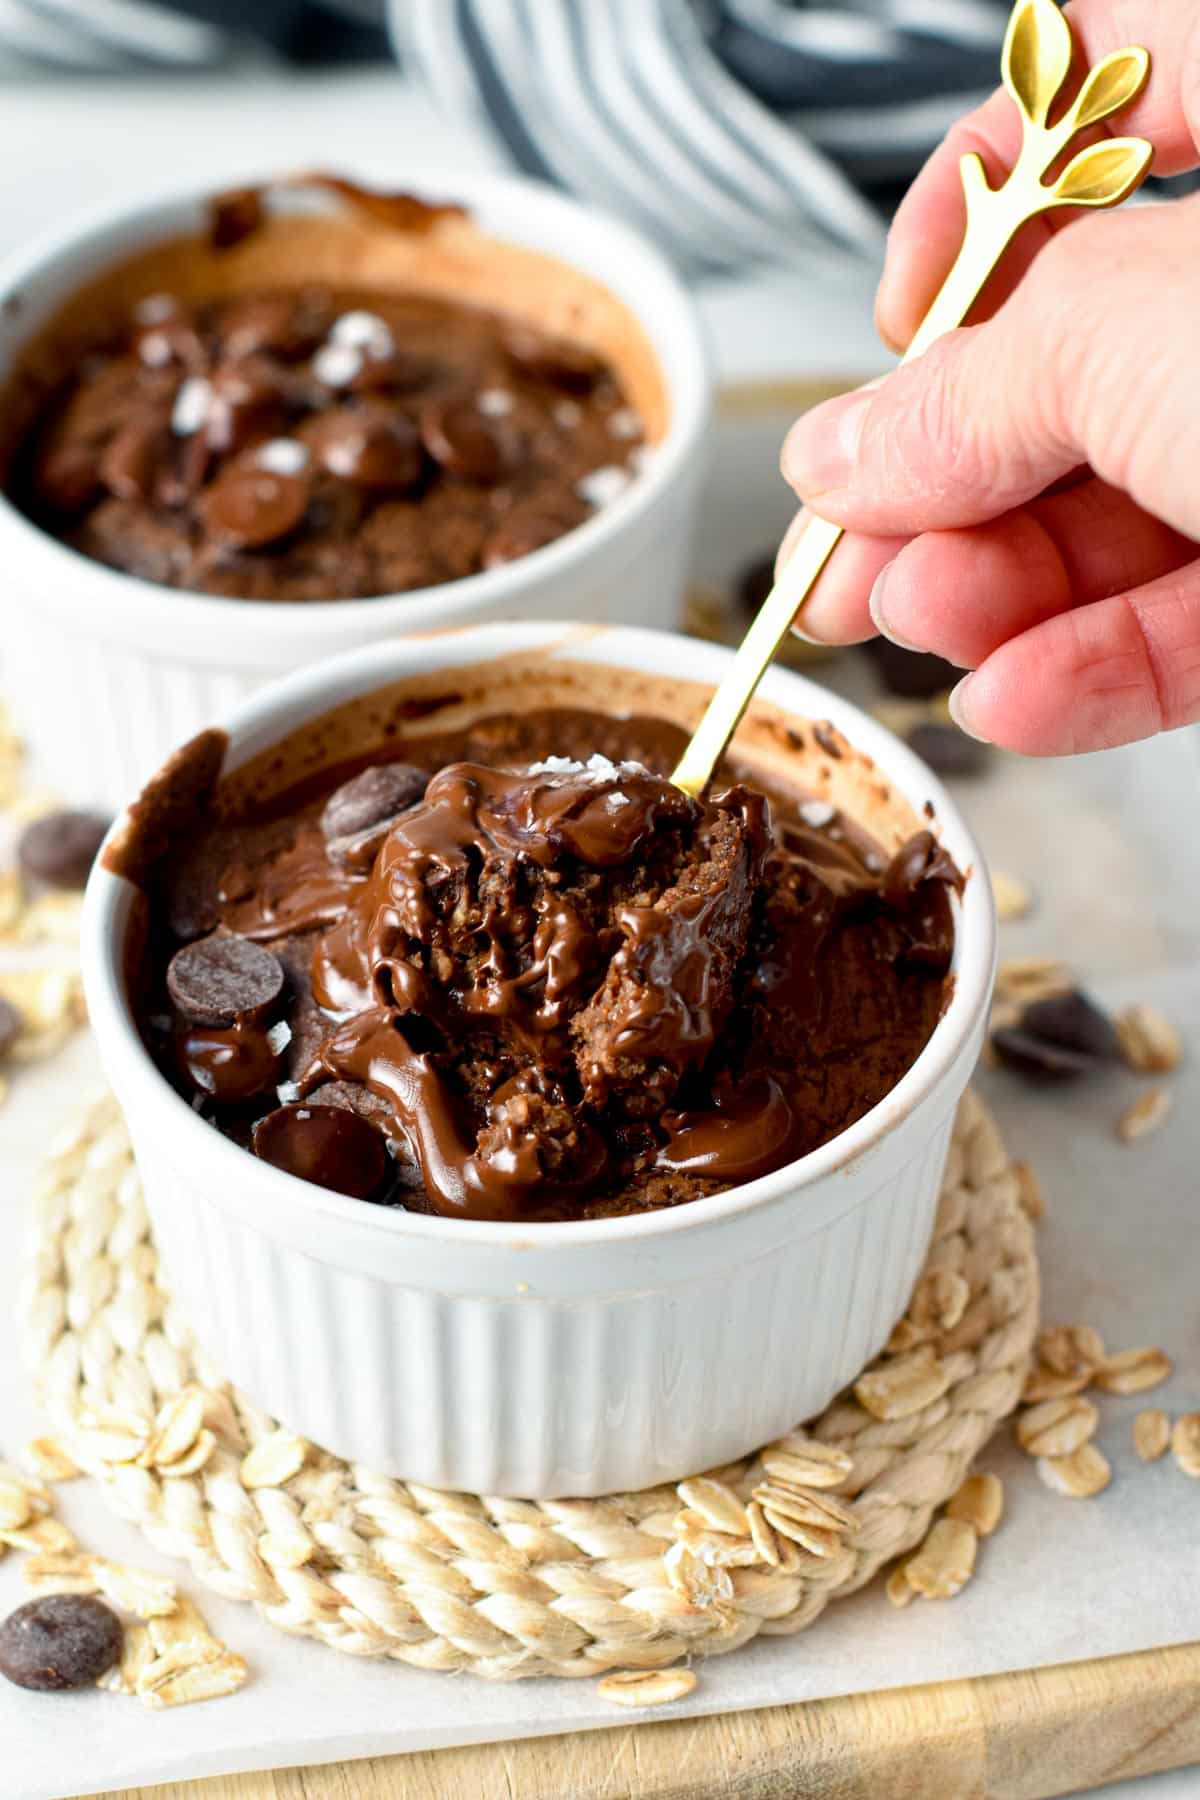 This Chocolate Baked Oats is an easy, healthy breakfast packed with 17grams protein, fiber and the most delicious chocolate flavors. Plus, this baked oats recipe is also dairy-free with gluten-free and vegan options.